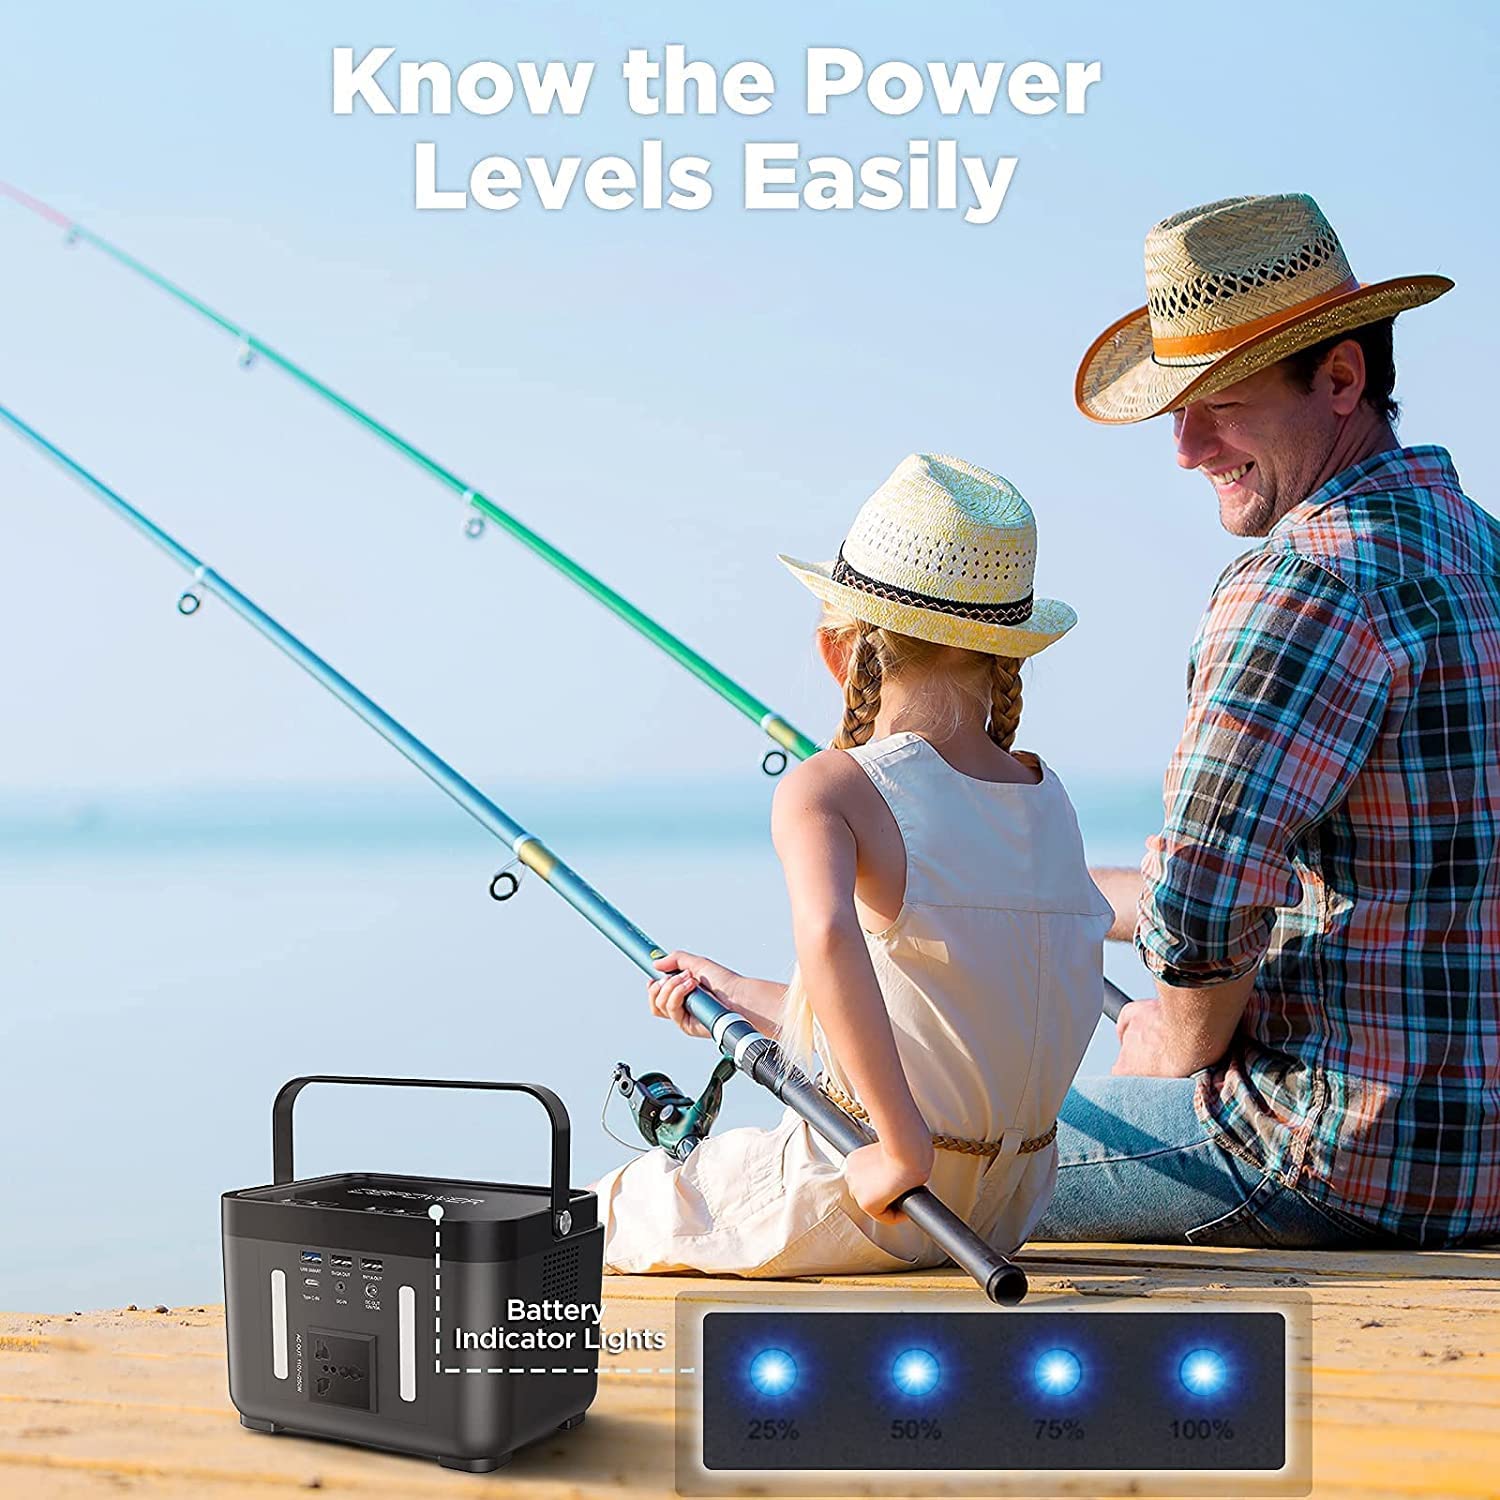 DBPOWER Portable Power Station, Peak 350W Backup Lithium Battery 250Wh